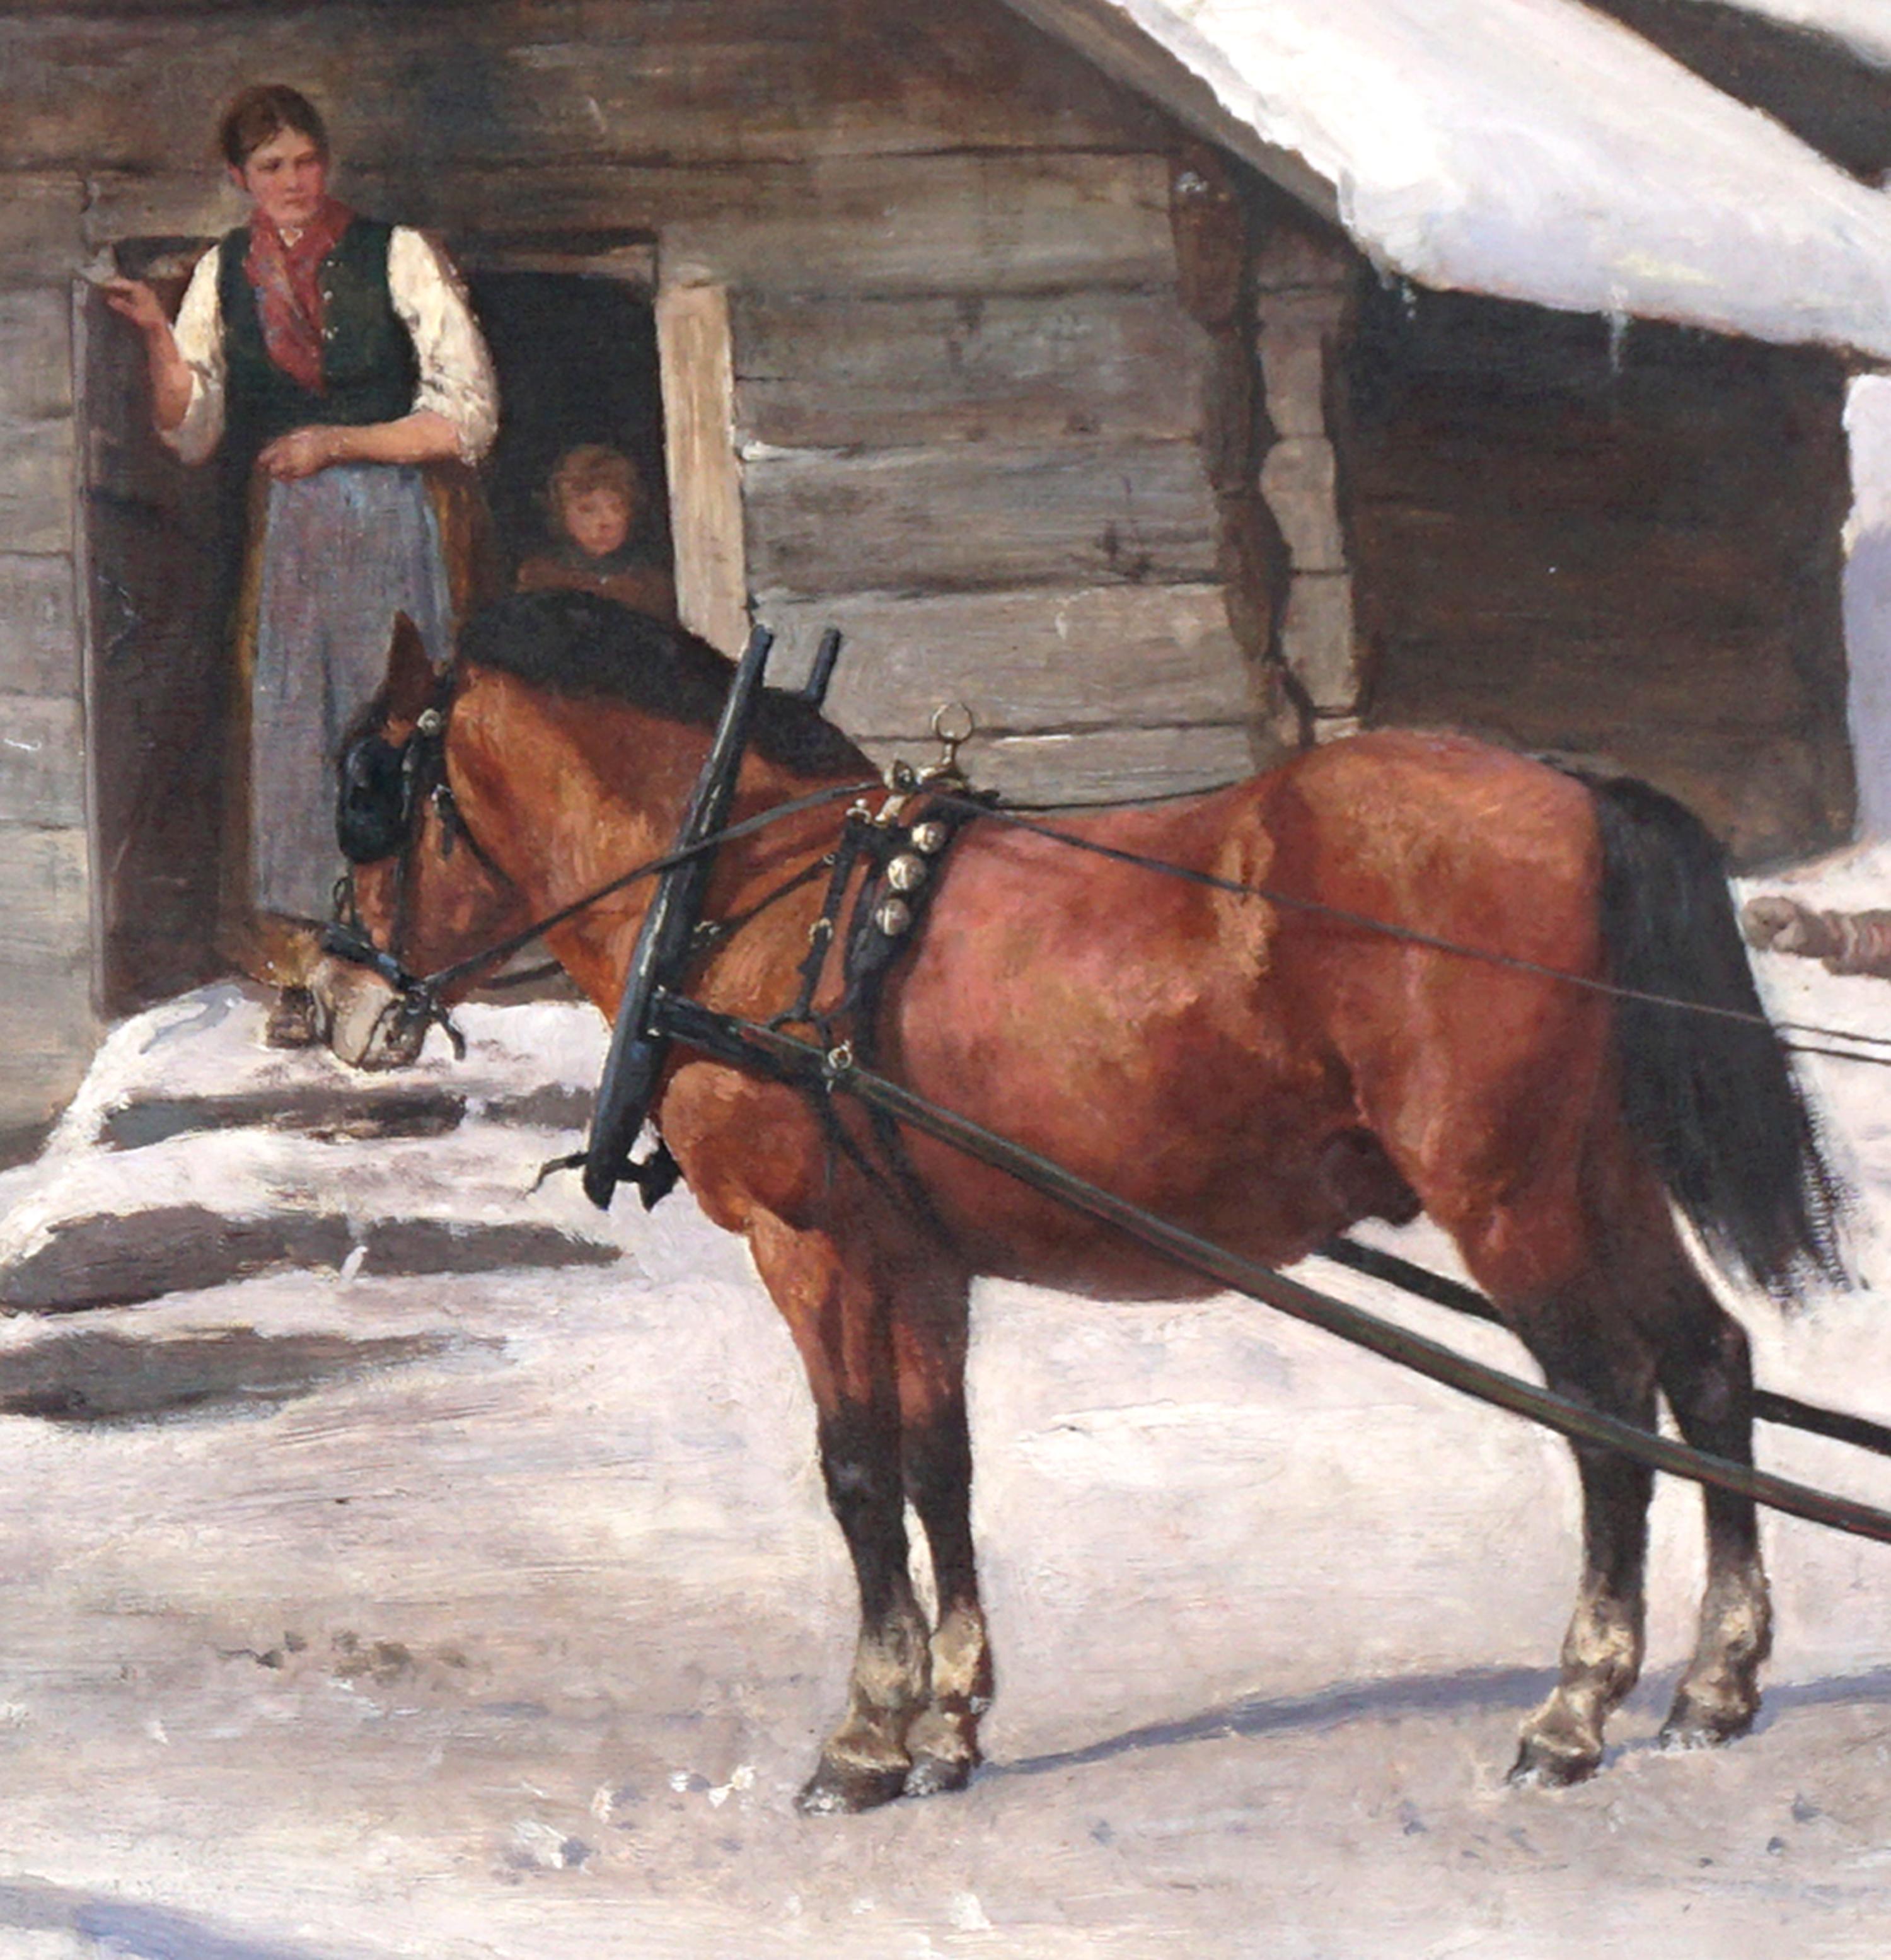 Wonderful turn-of-20th-Century winter's scene with horse sleigh and woman and son giving directions to the sleigh driver by Alex Hijalmar Ender (Norwegian, 1853-1920), circa 1880-1900 in an original CW Blomqvist period giltwood and gesso frame.